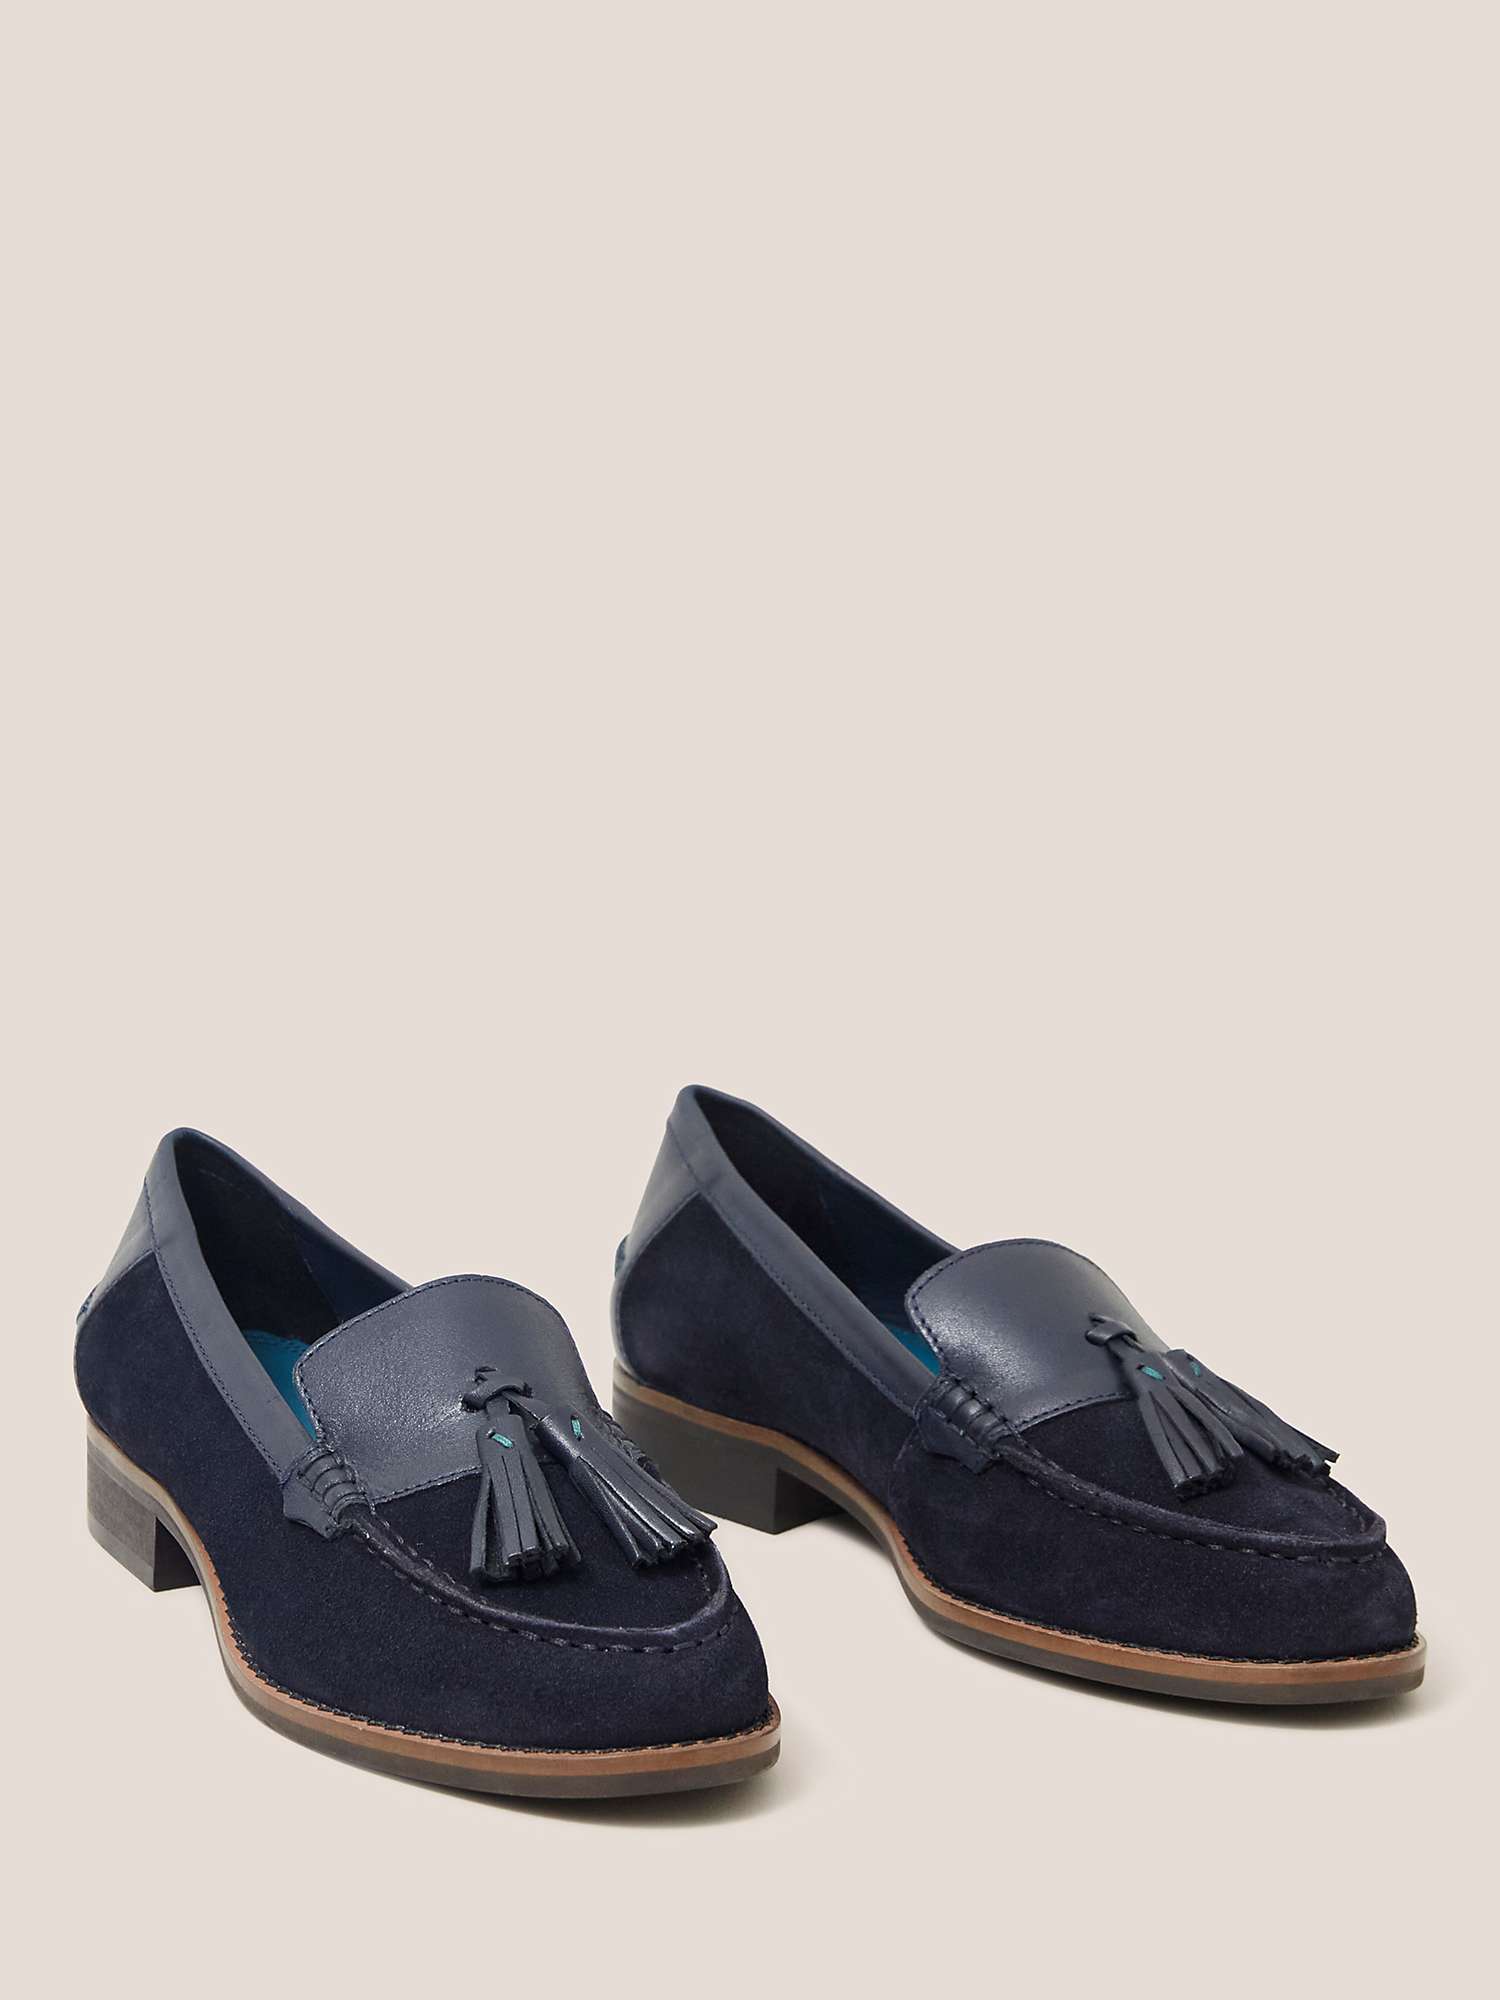 Buy White Stuff Elba Leather And Suede Loafers, Dark navy Online at johnlewis.com